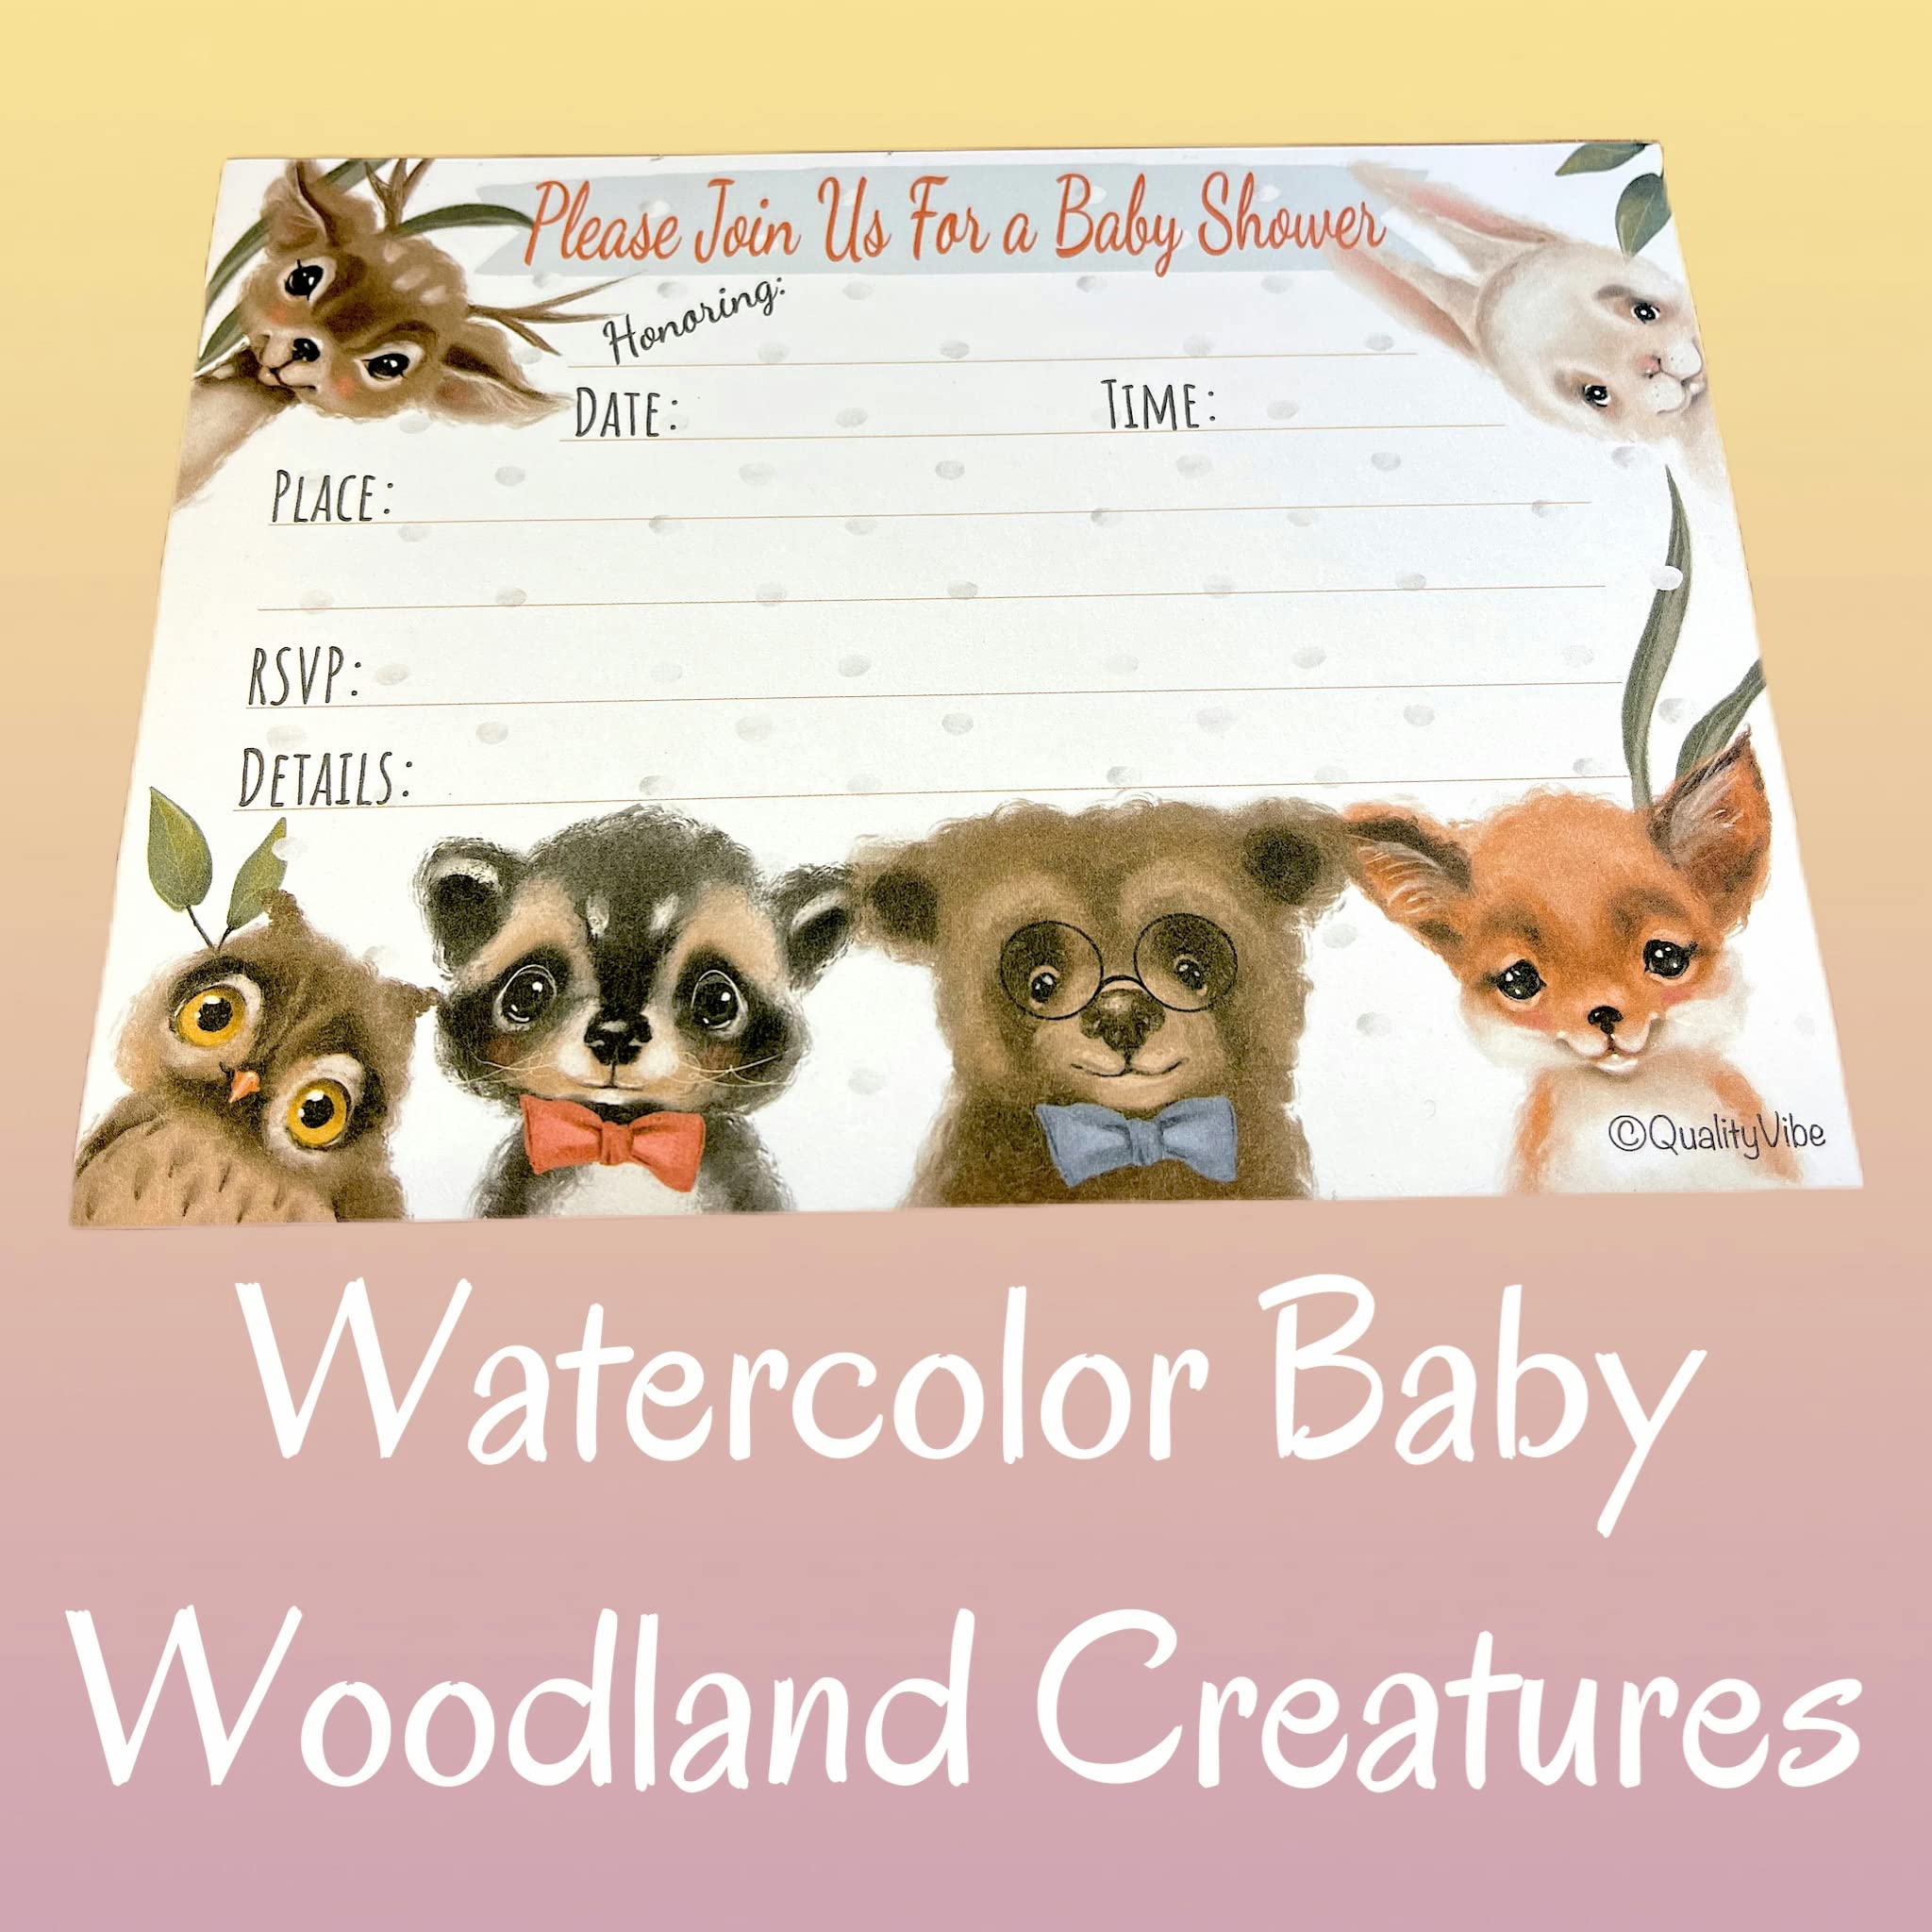 Baby Shower Invitations Woodland Creatures For Baby Boy or girl. Set Includes 25 Invites, 25 Baby Book Inserts, 25 Diaper Raffle & 25 Envelopes. Watercolor Design Bear, Racoon, Deer, Rabbit & Fox.